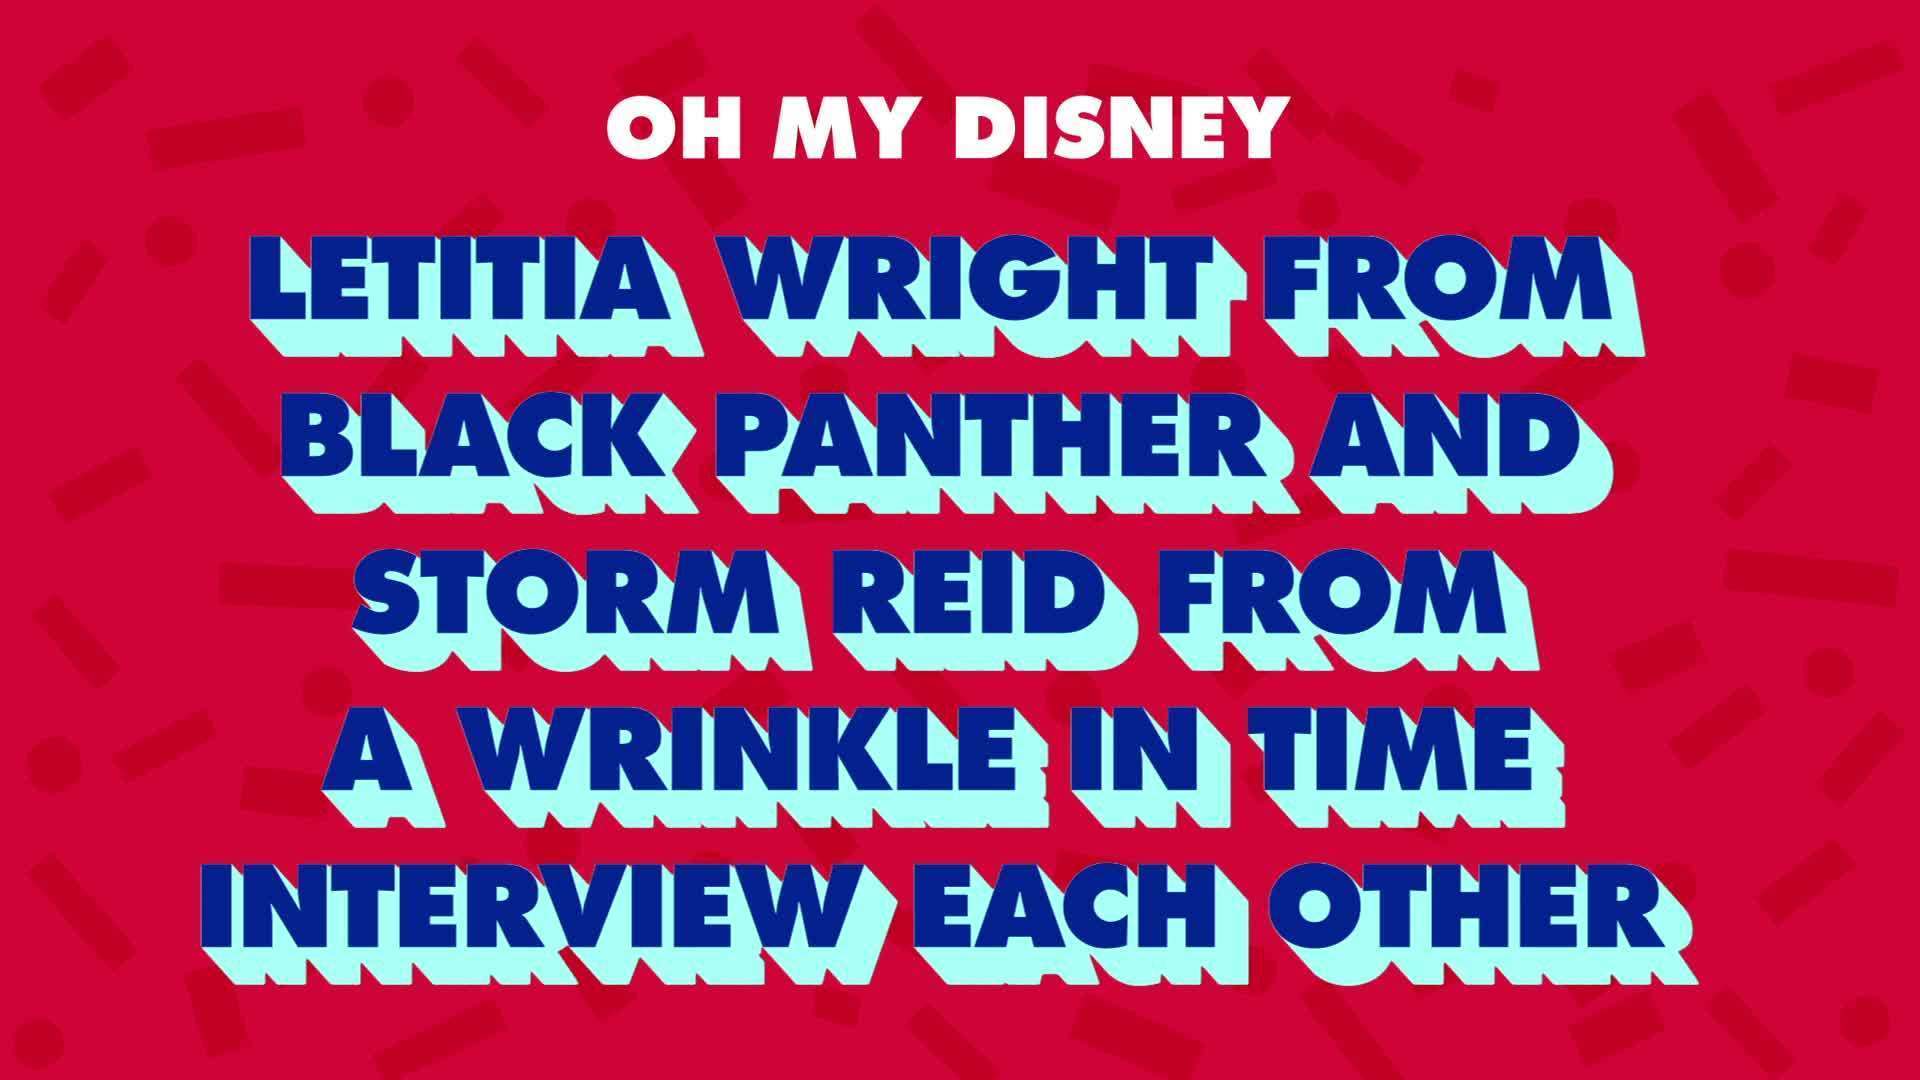 Letitia Wright and Storm Reid Interview Each Other | The Oh My Disney Show by Oh My Disney